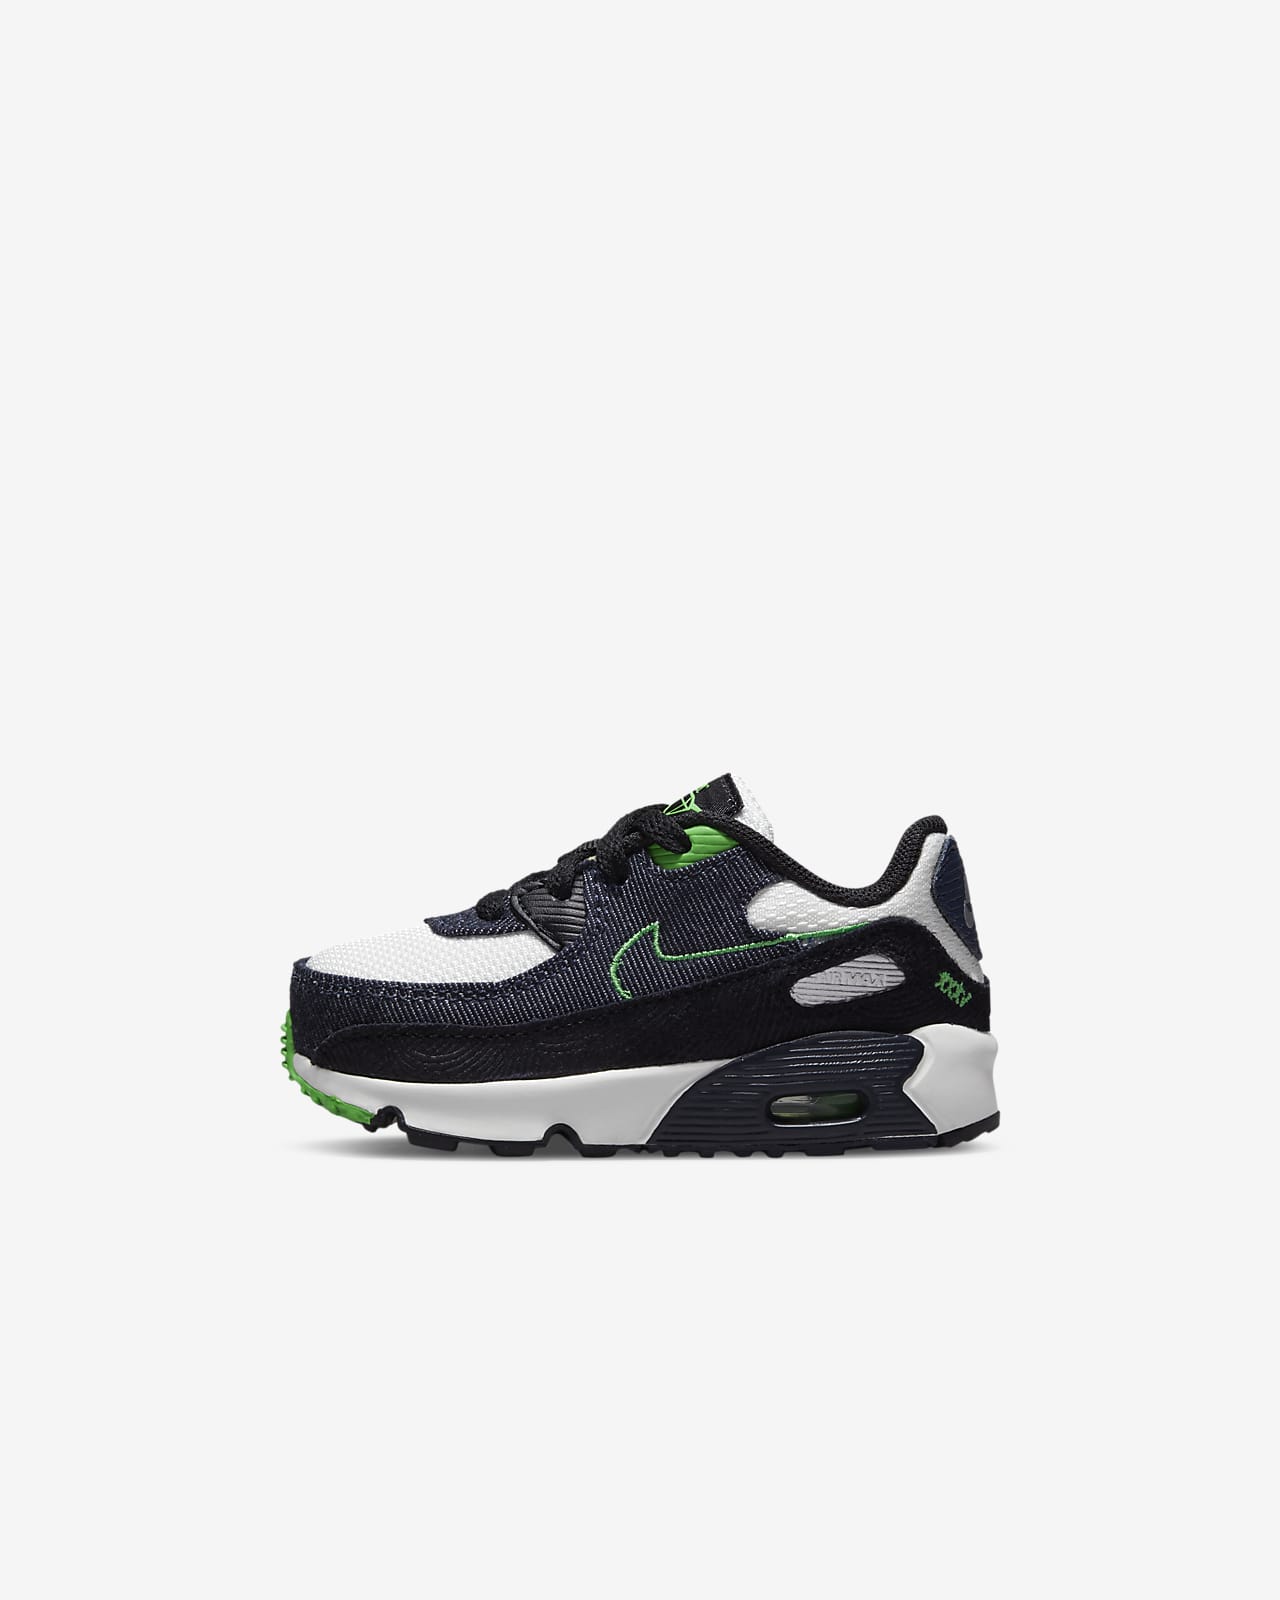 undefined | Nike Air Max 90 LTR SE